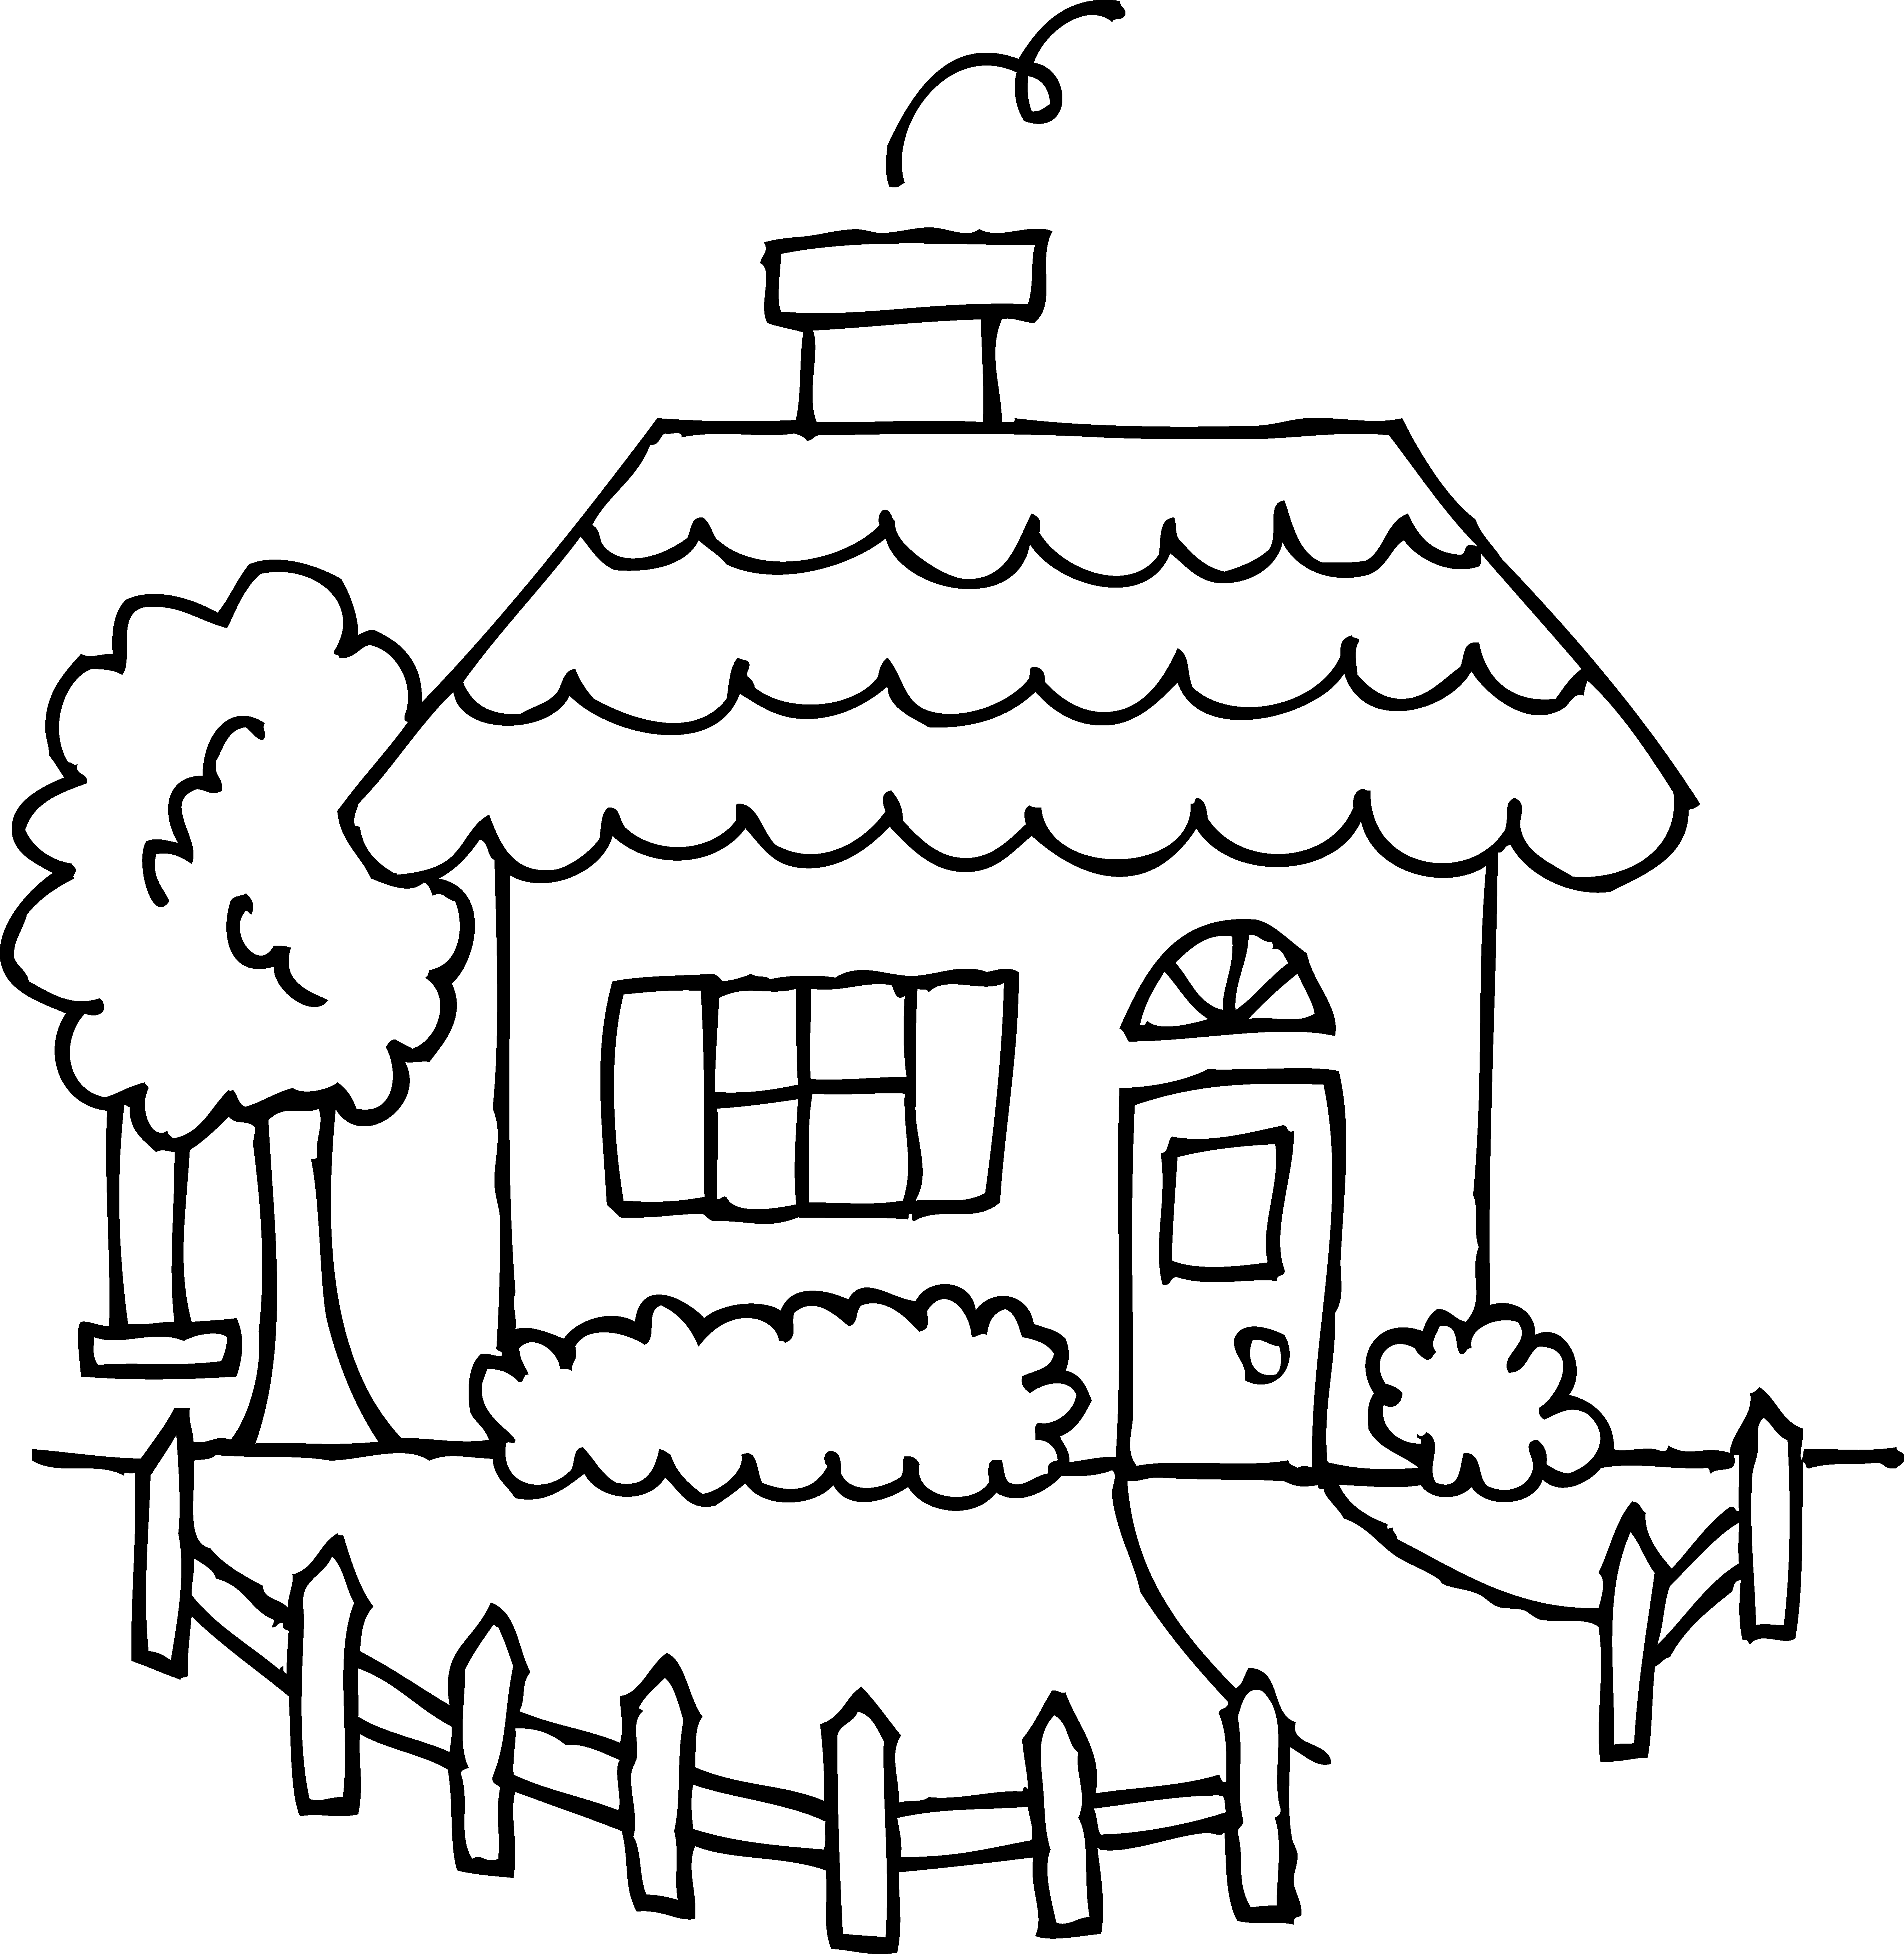 White house coloring page. Houses clipart clothes